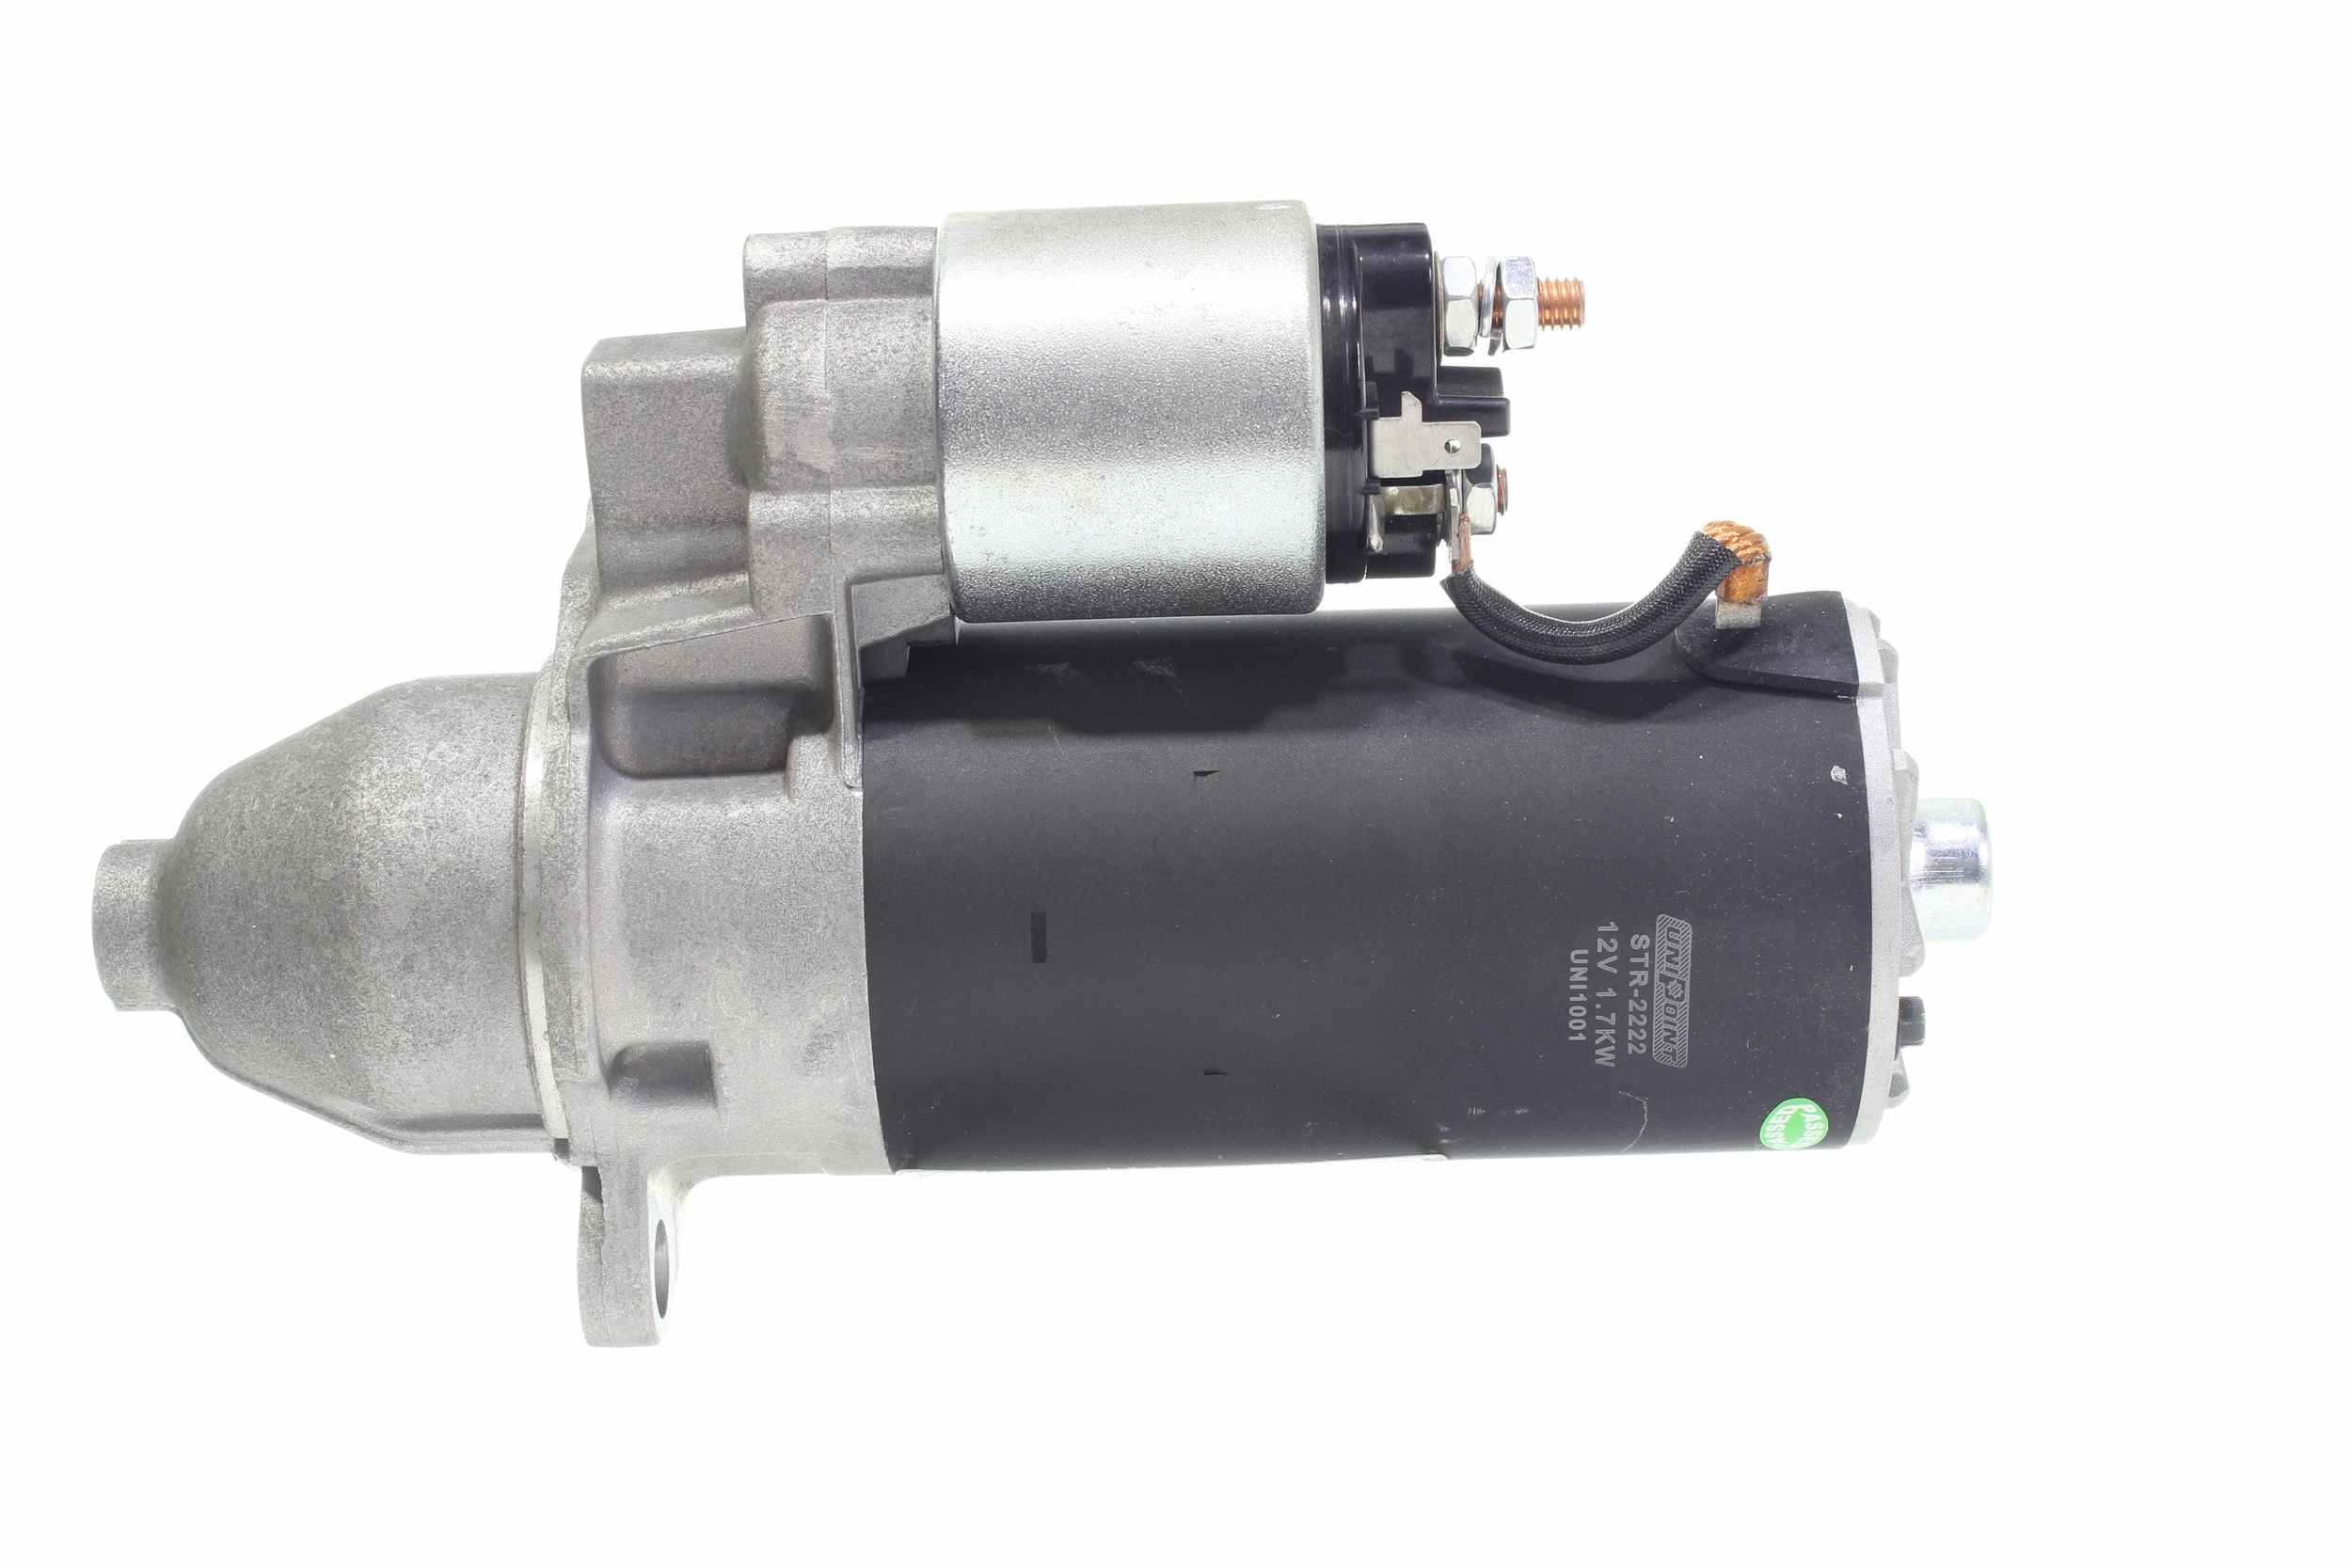 10440915 Engine starter motor ALANKO 120198 review and test